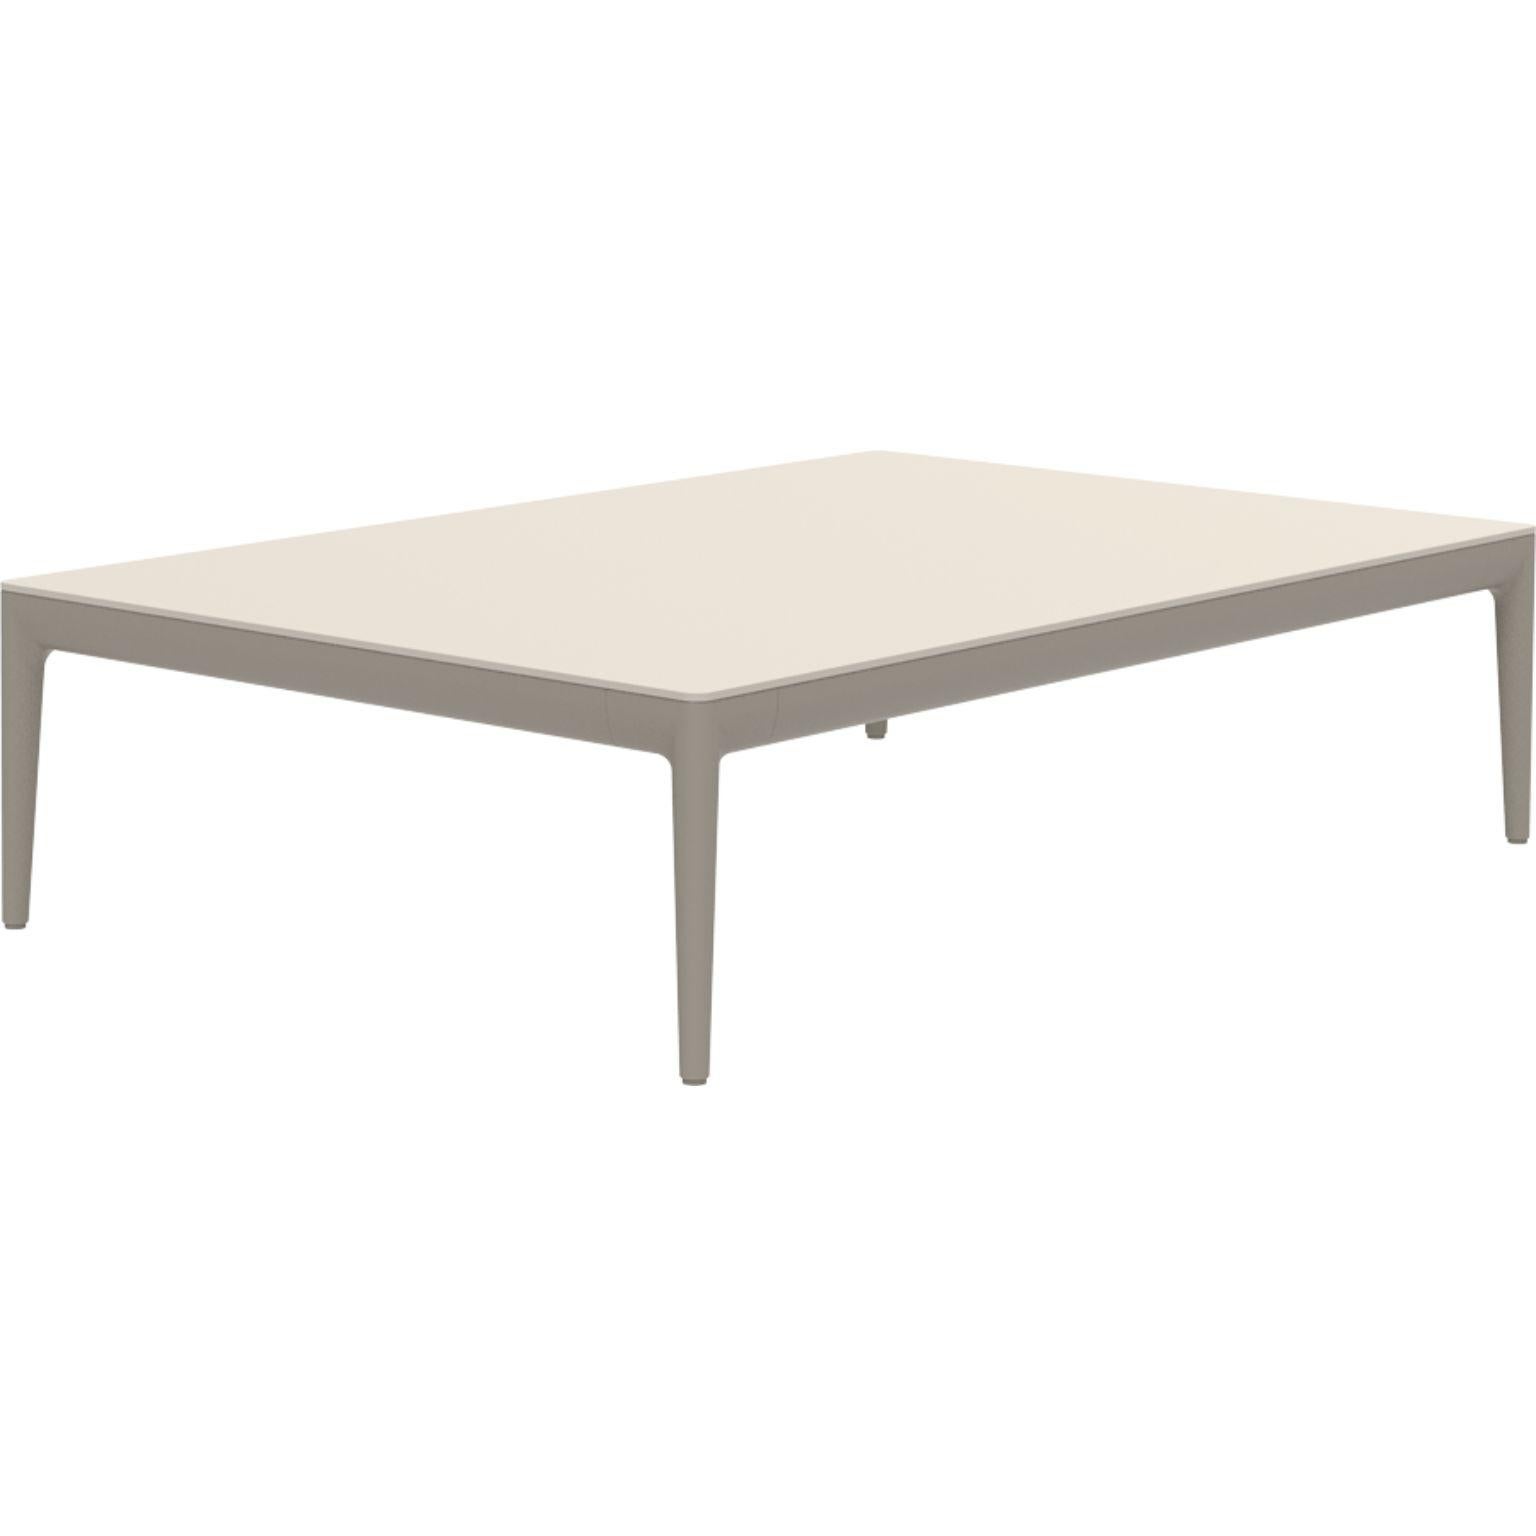 Ribbons Cream 115 coffee table by MOWEE
Dimensions: D76 x W115 x H29 cm
Material: Aluminum and HPL top.
Weight: 14.5 kg.
Also available in different colors and finishes. (HPL Black Edge or Neolith top). 

An unmistakable collection for its